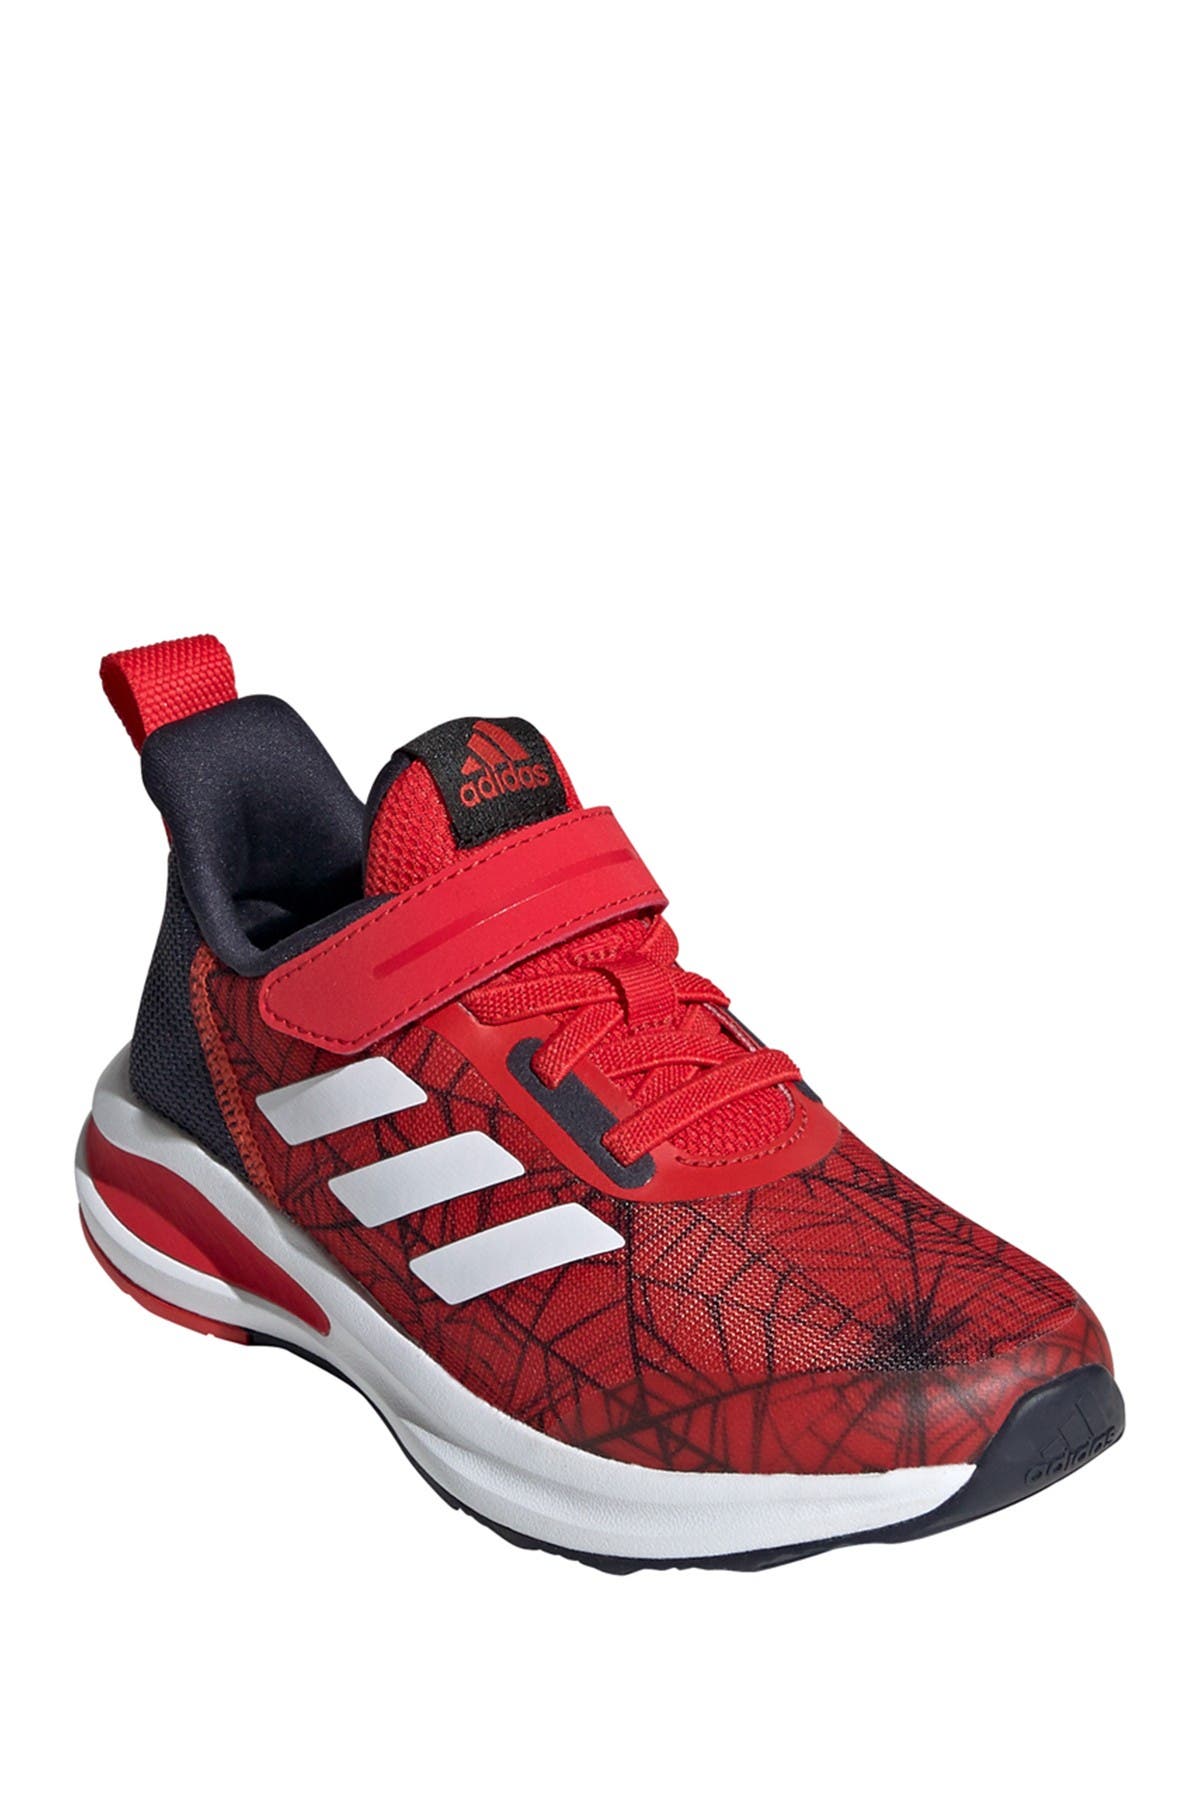 adidas spiderman shoes size 11